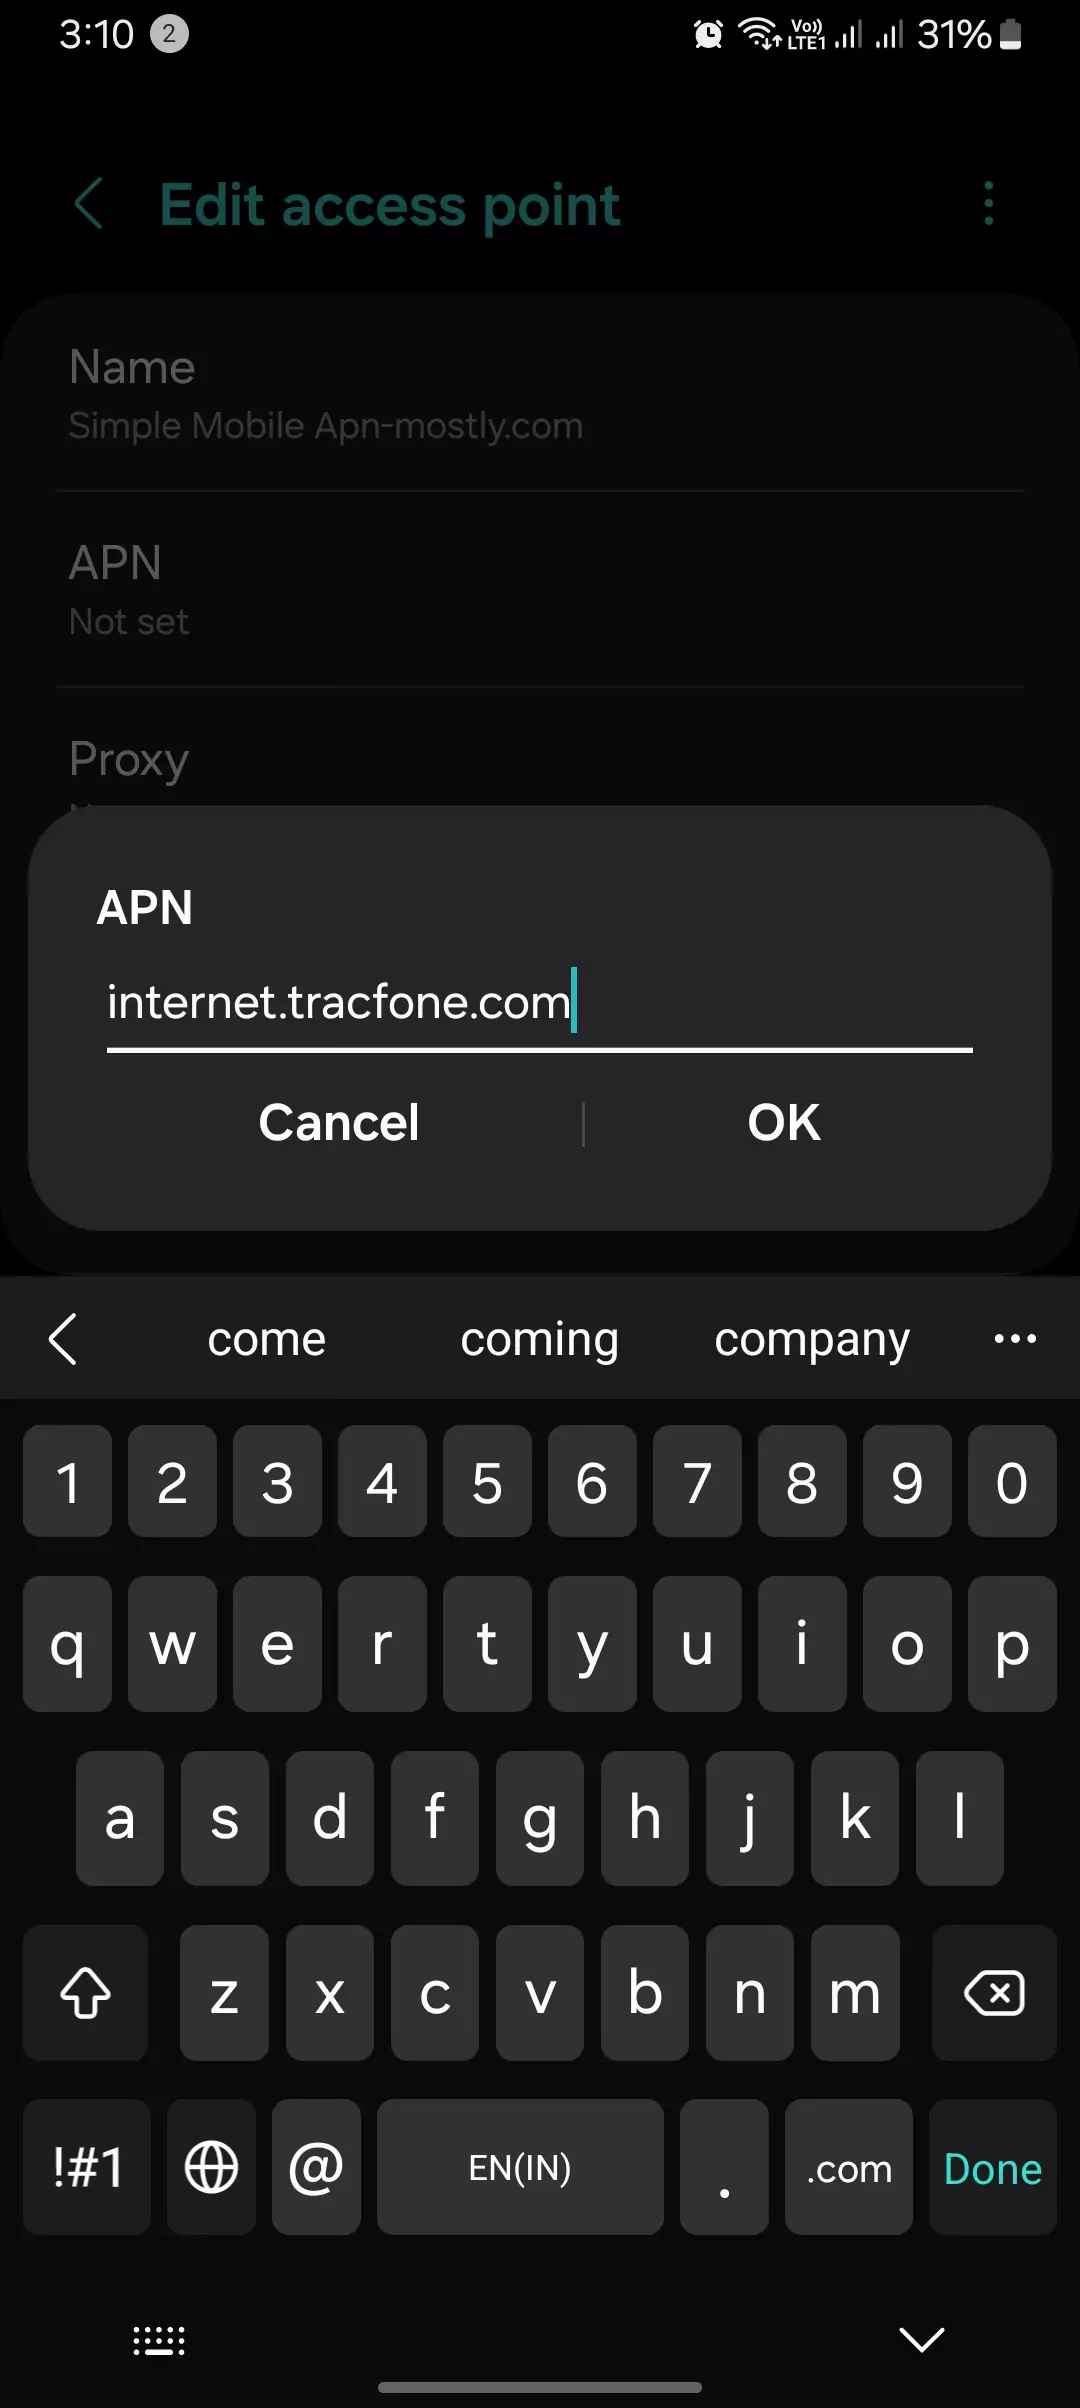 screenshot of entering the APN into the simple mobile